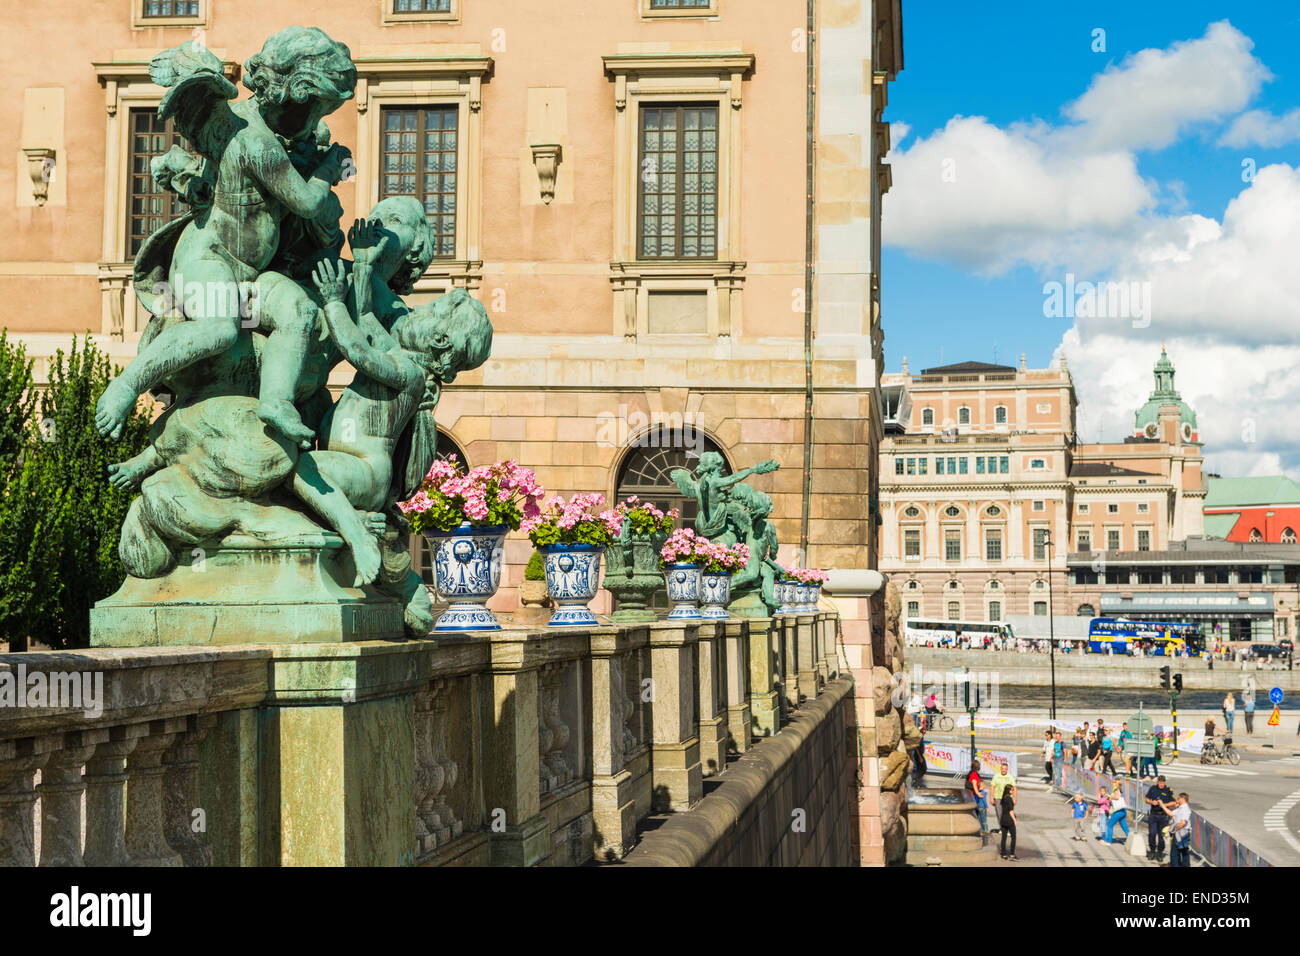 Terrace of the Royal Palace, Stockholm, Sweden.  Sculptures by Johan Axel Wetterlund. Stock Photo